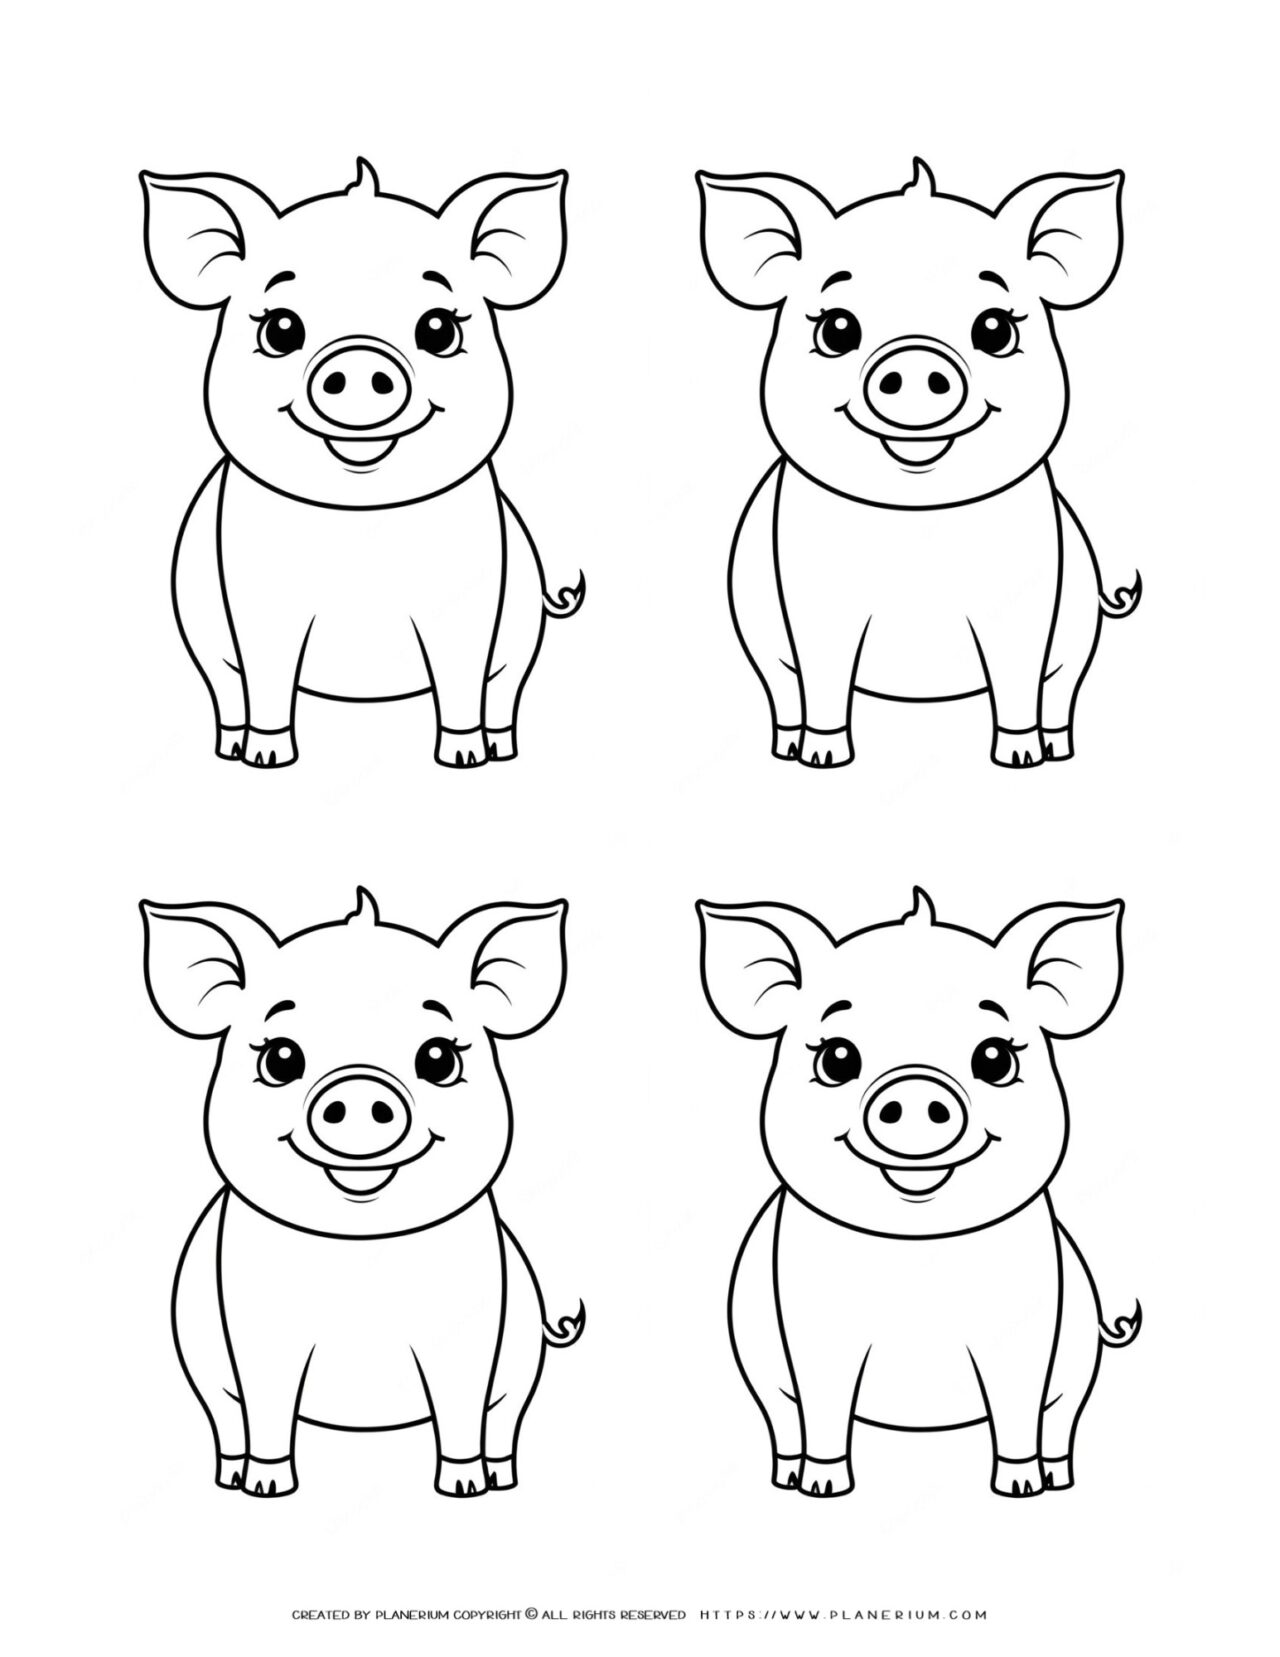 four-cute-happy-baby-pigs-front-view-outlines-farm-template